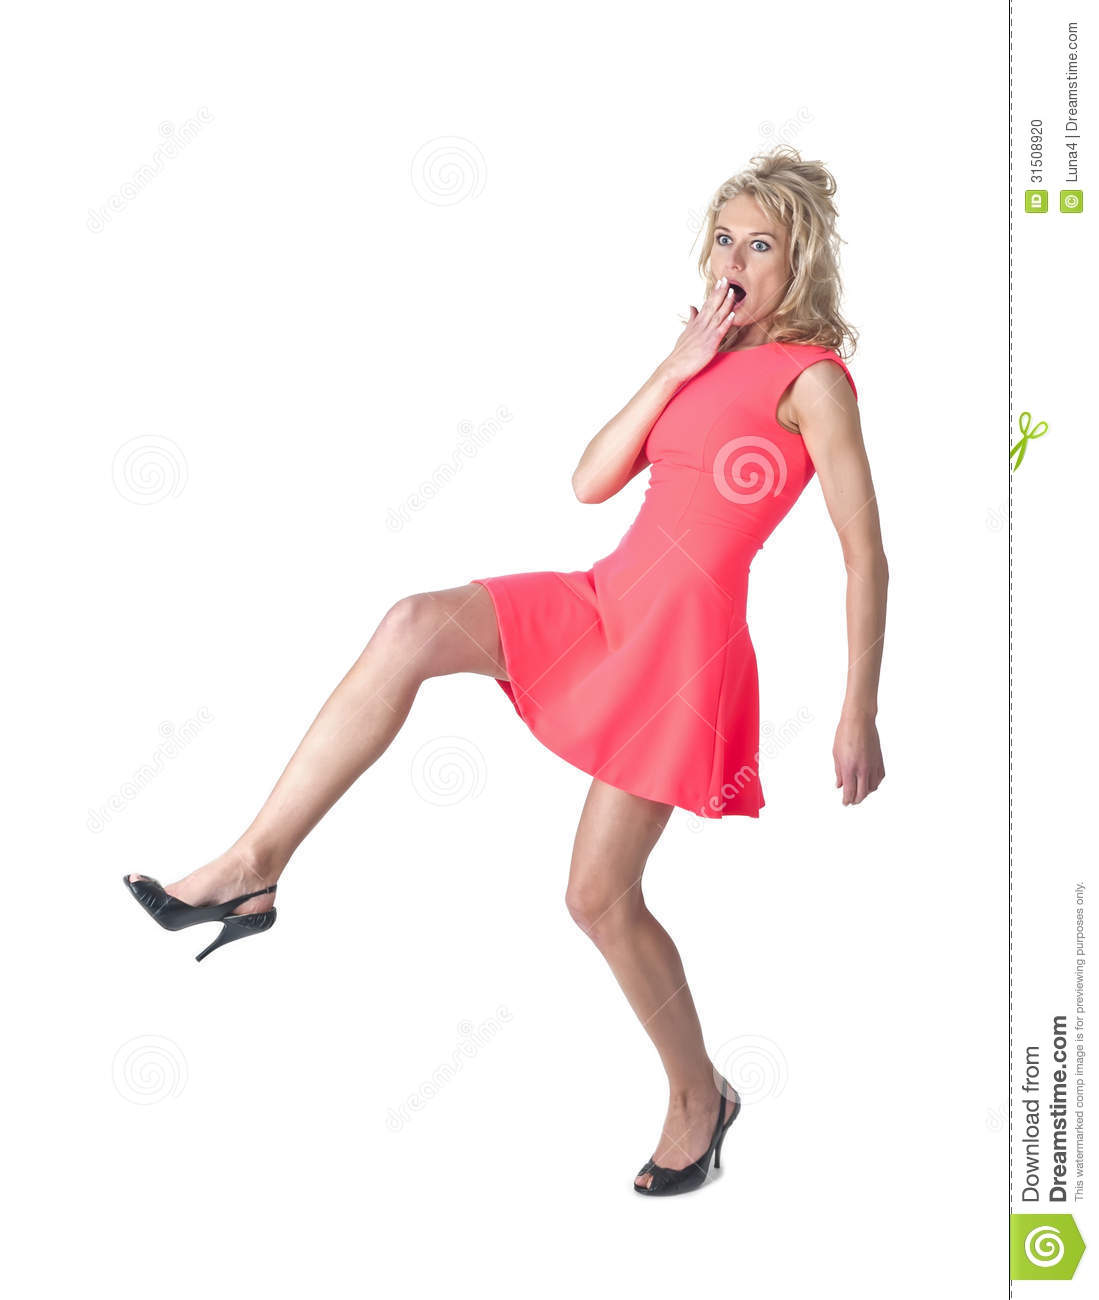 Surprised Woman With Hand Over Mouth Stock Photo   Image  31508920